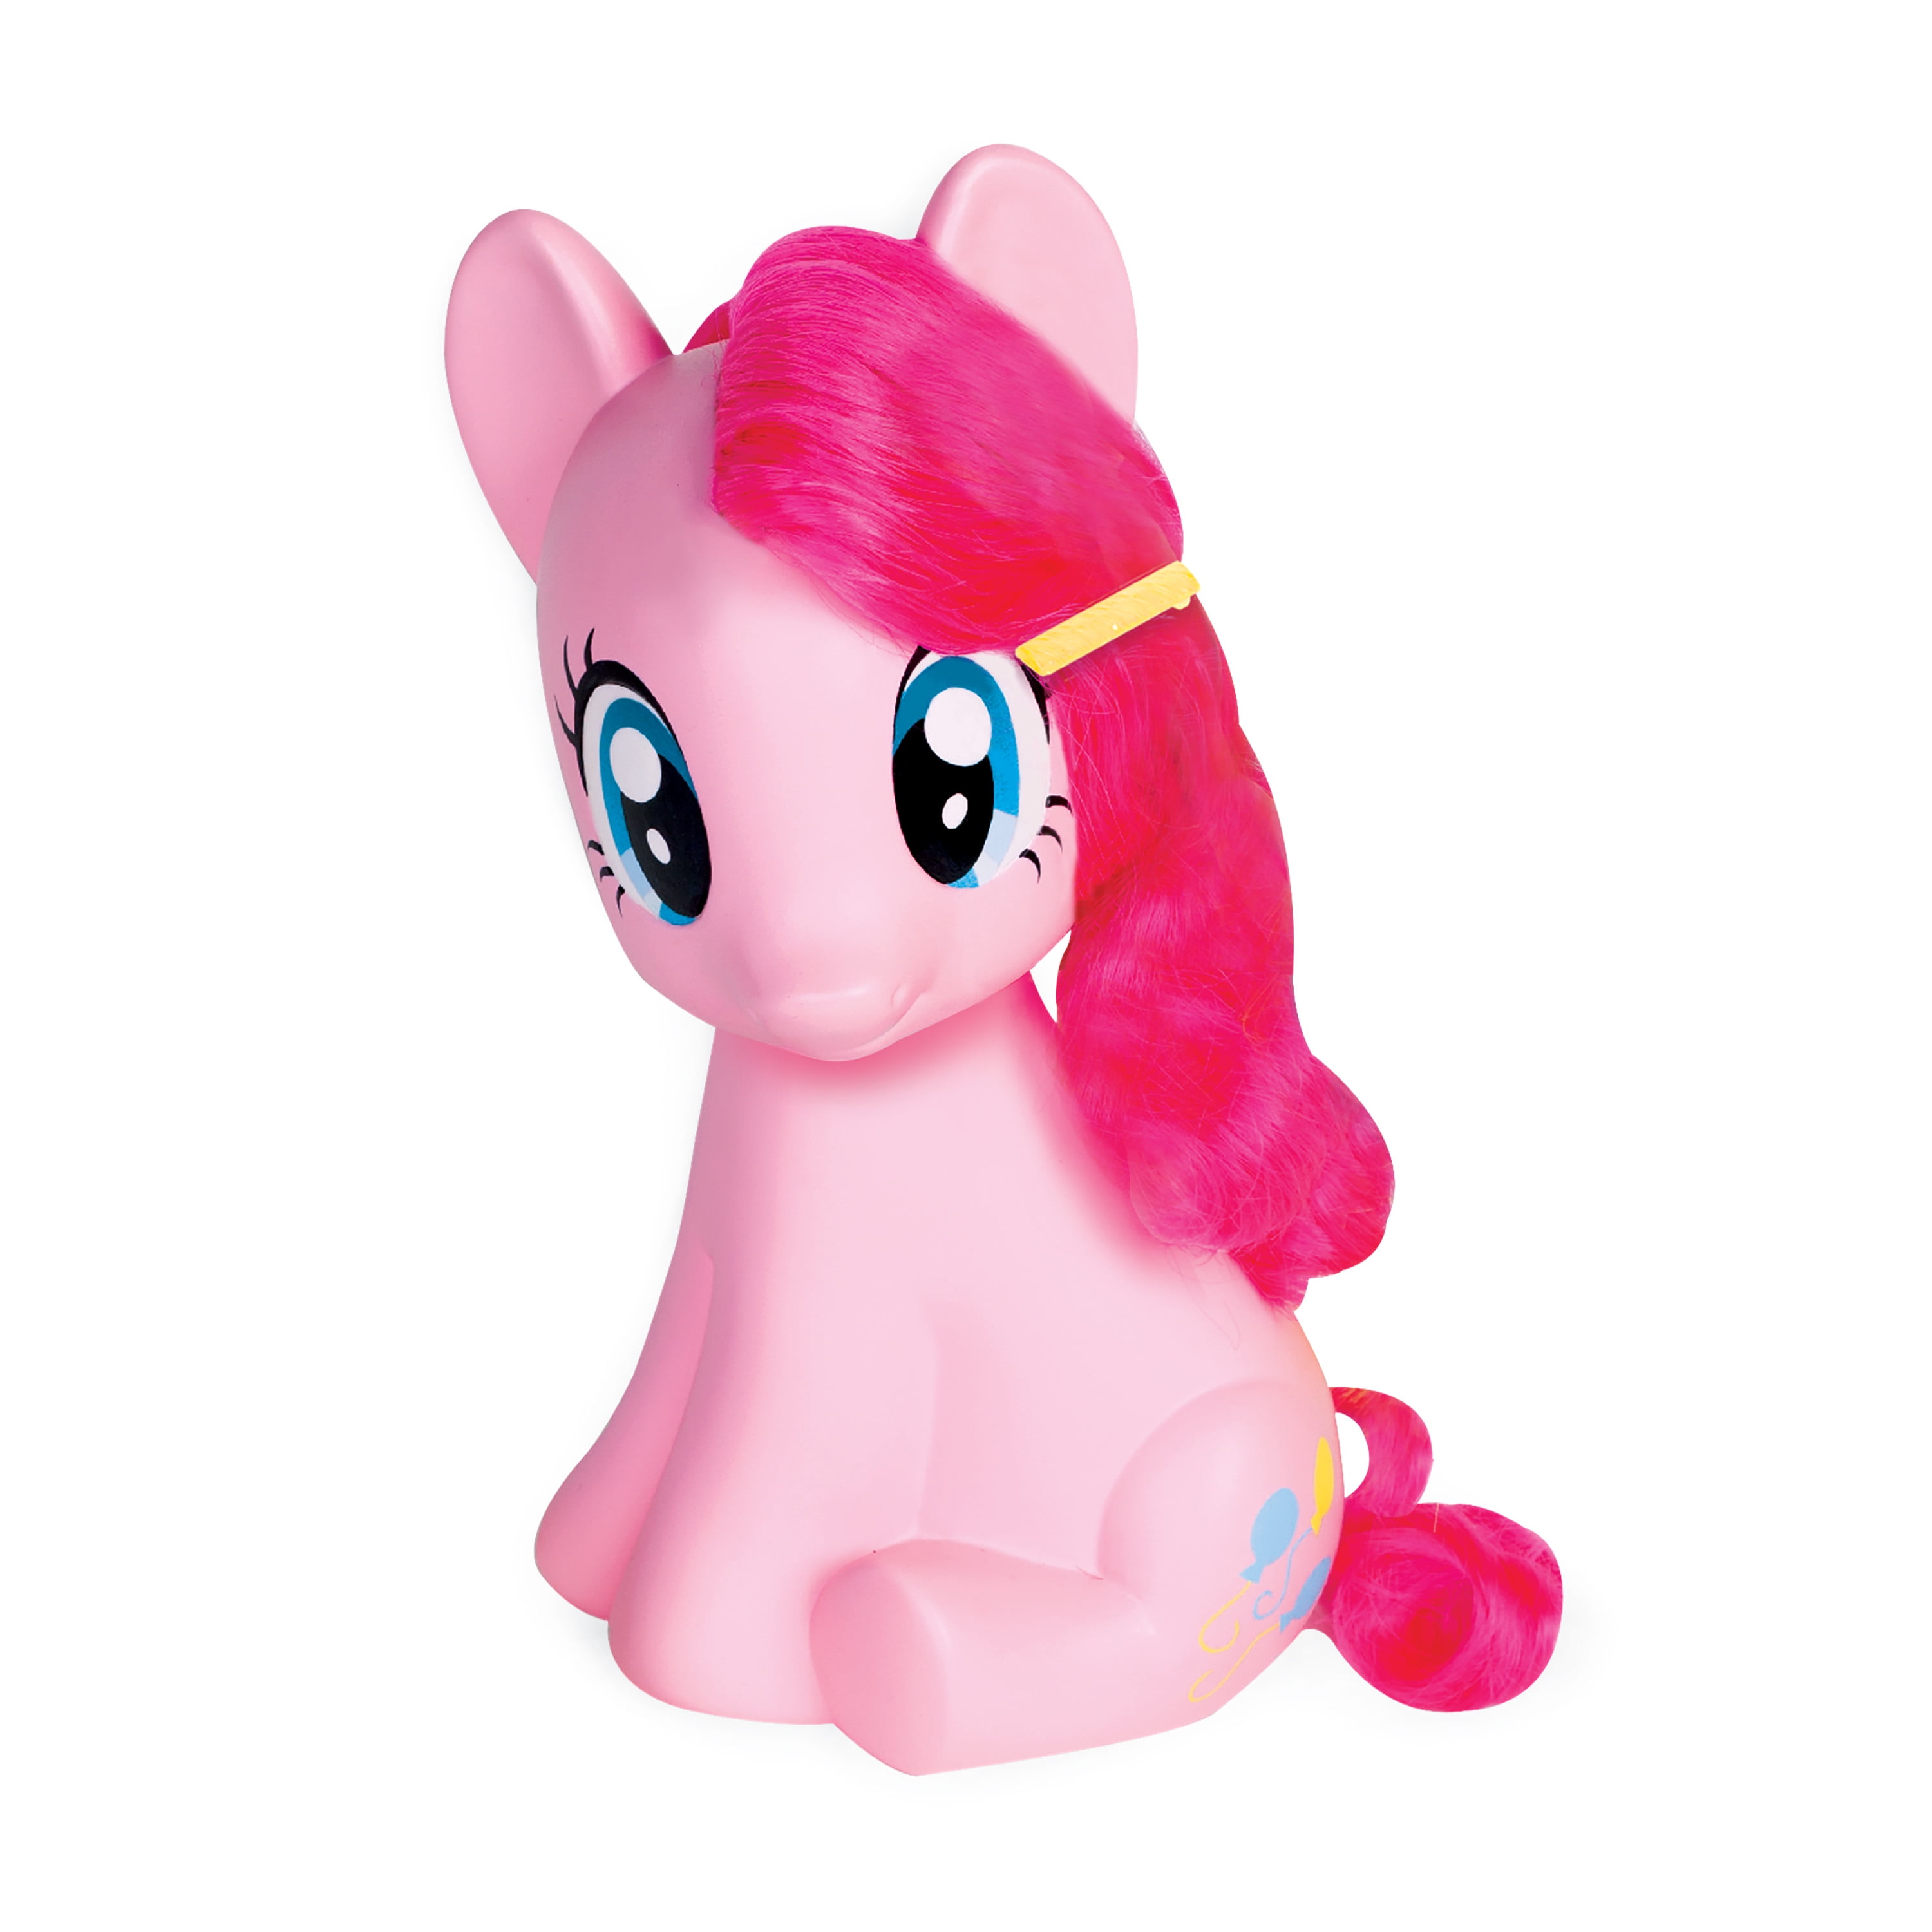 My Little Pony Styling Head, Pinkie Pie,  Kids Toys for Ages 3 Up, Gifts and Presents $5.47 + Free S&H w/ Walmart+ or $35+